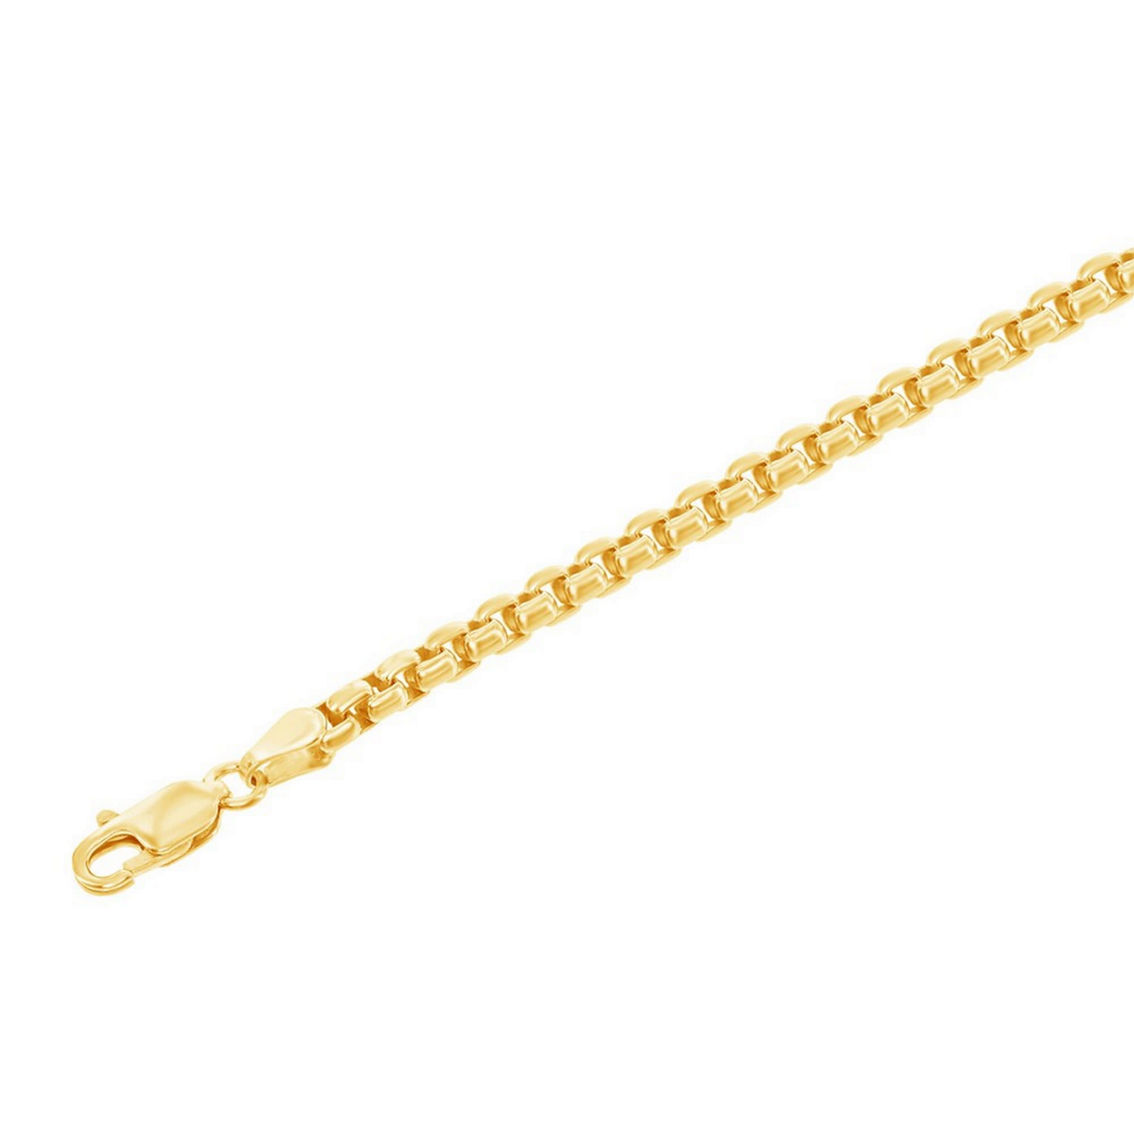 Links of Italy Sterling Silver 3mm Round Box Chain - Gold Plated - Image 2 of 4